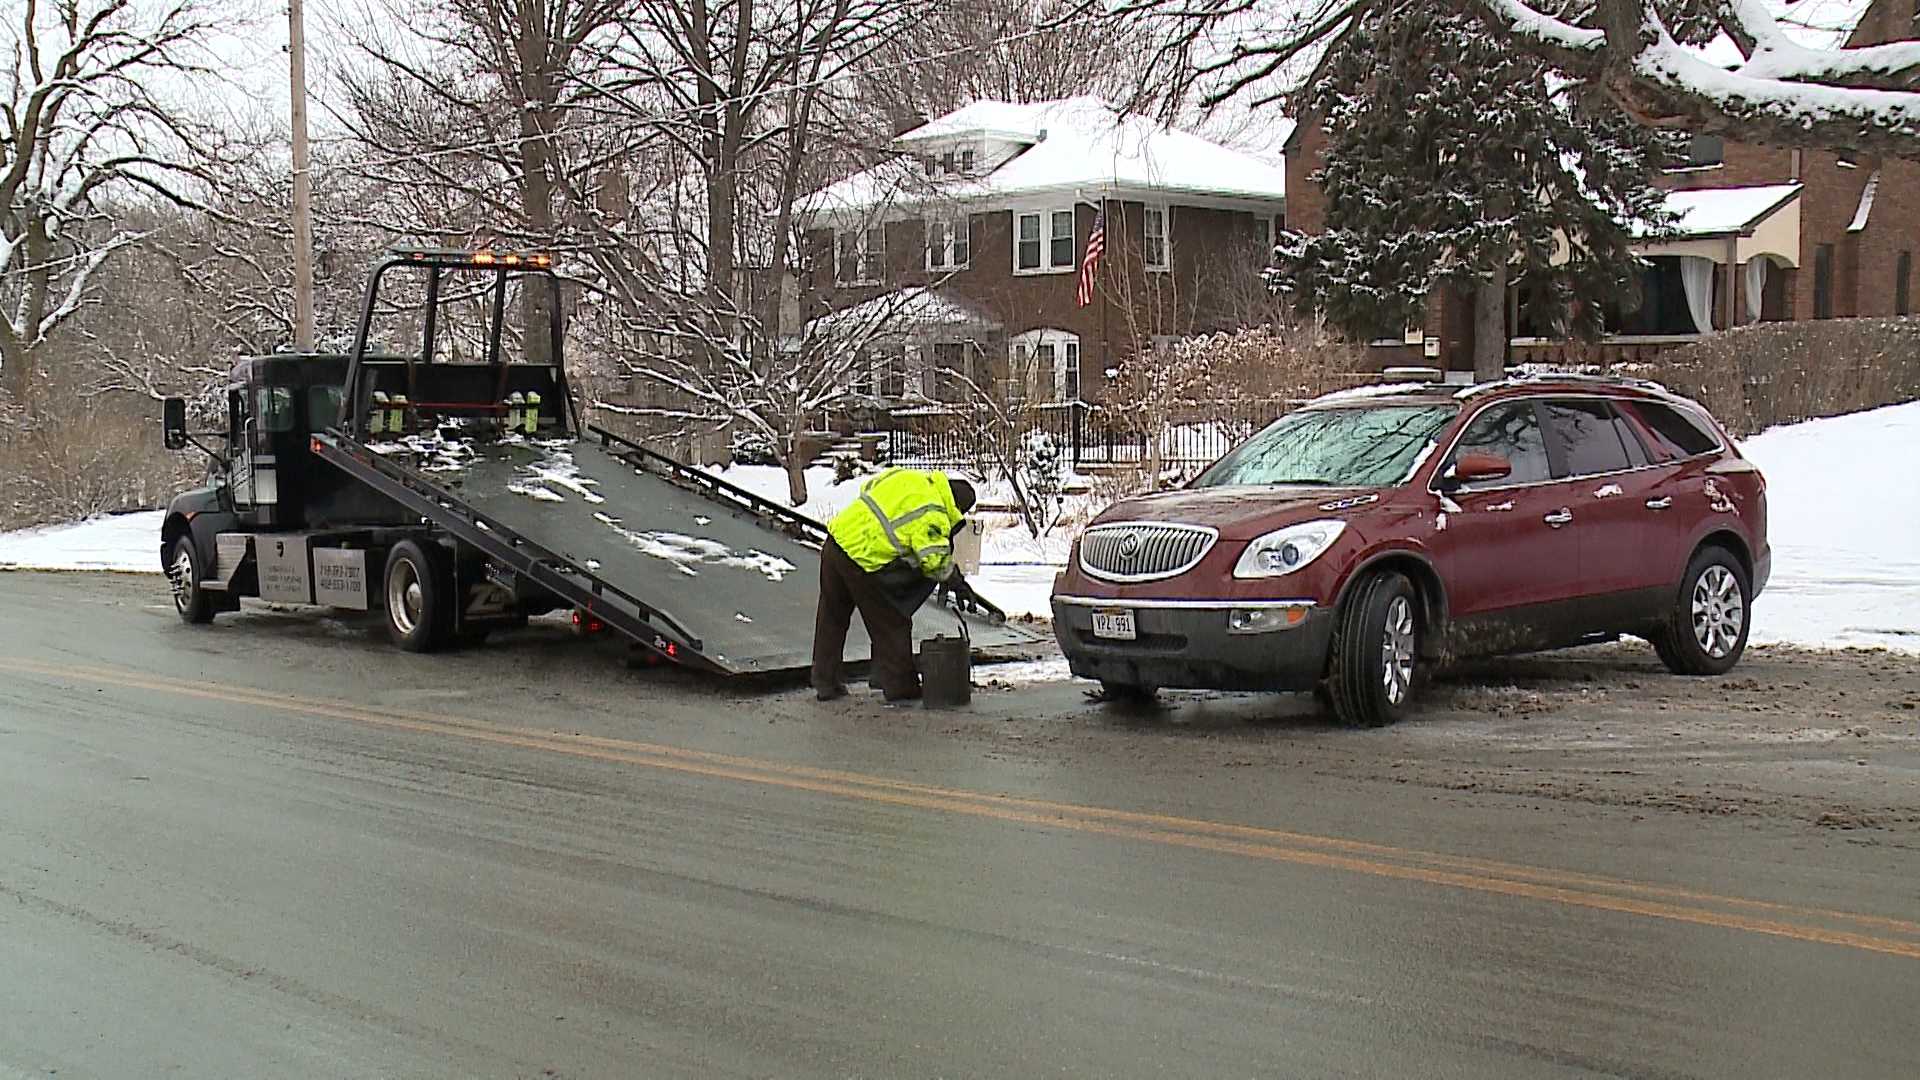 Extra tow truck drivers called in to keep up with Thursday accidents